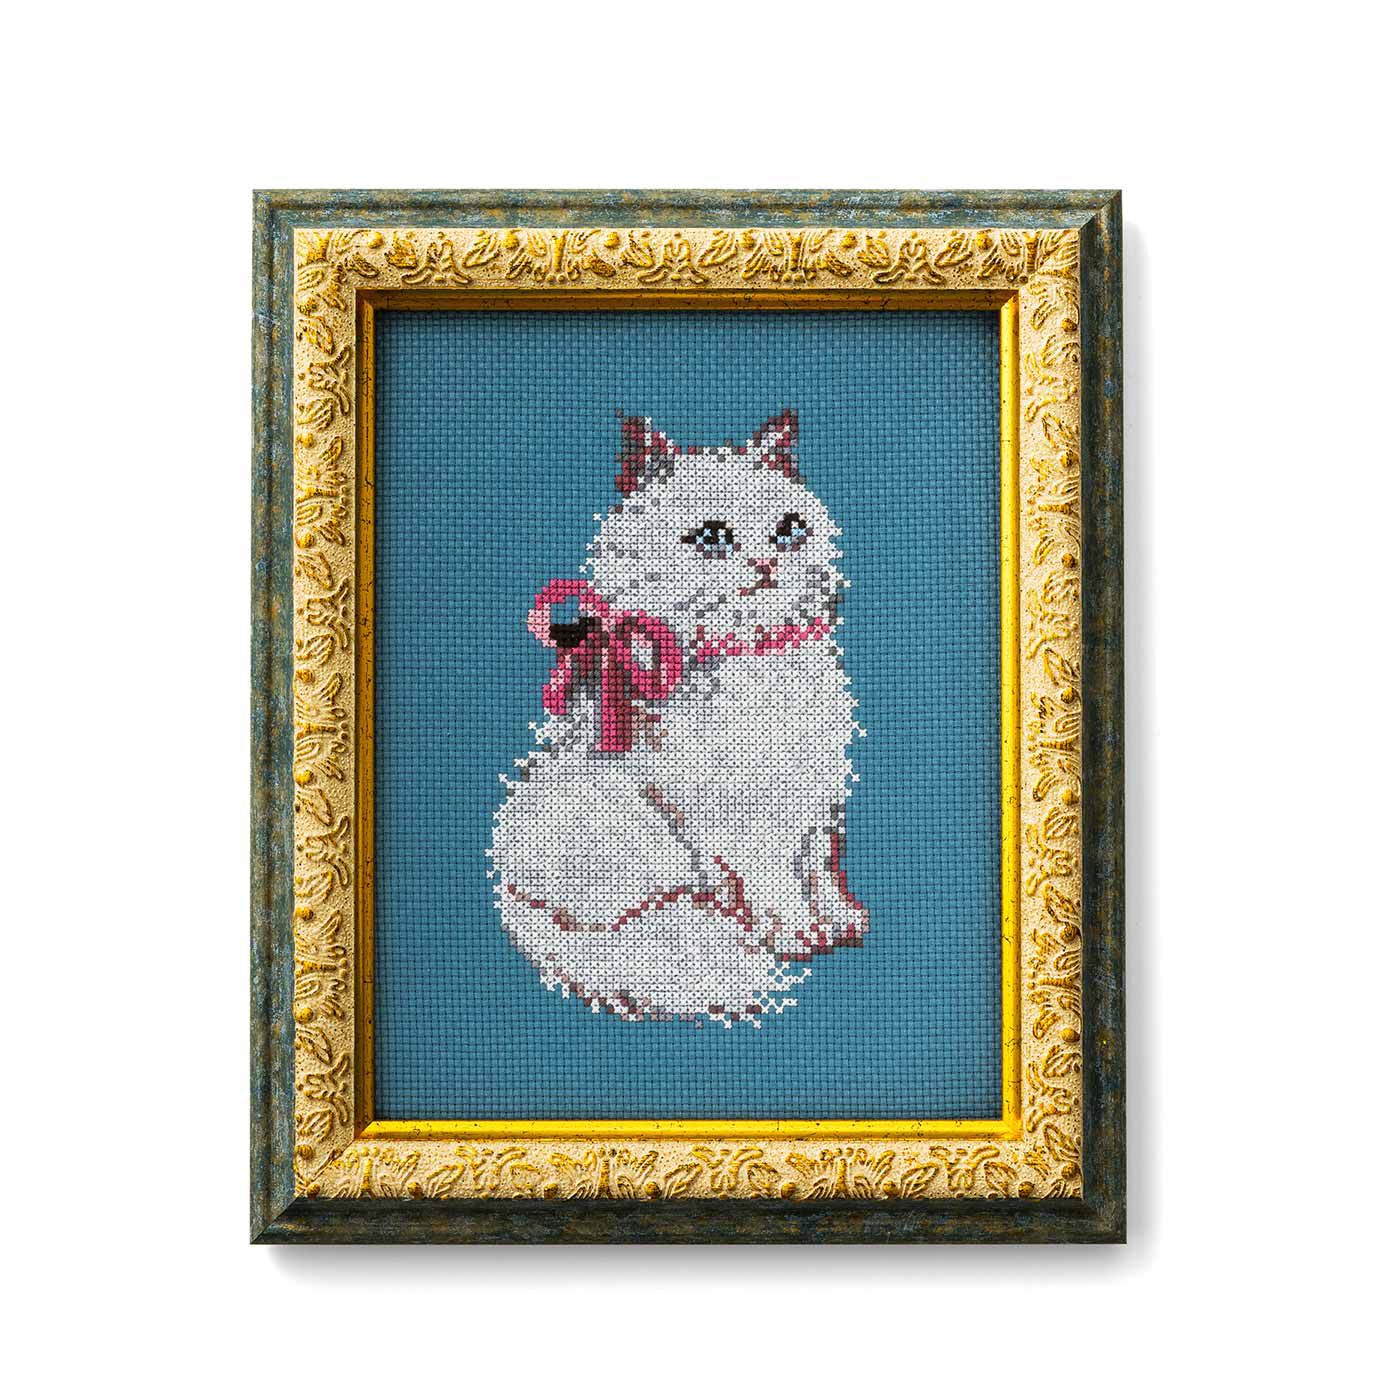 Colorful cat in dark counted cross stitch kits 14 ct, 猫と色